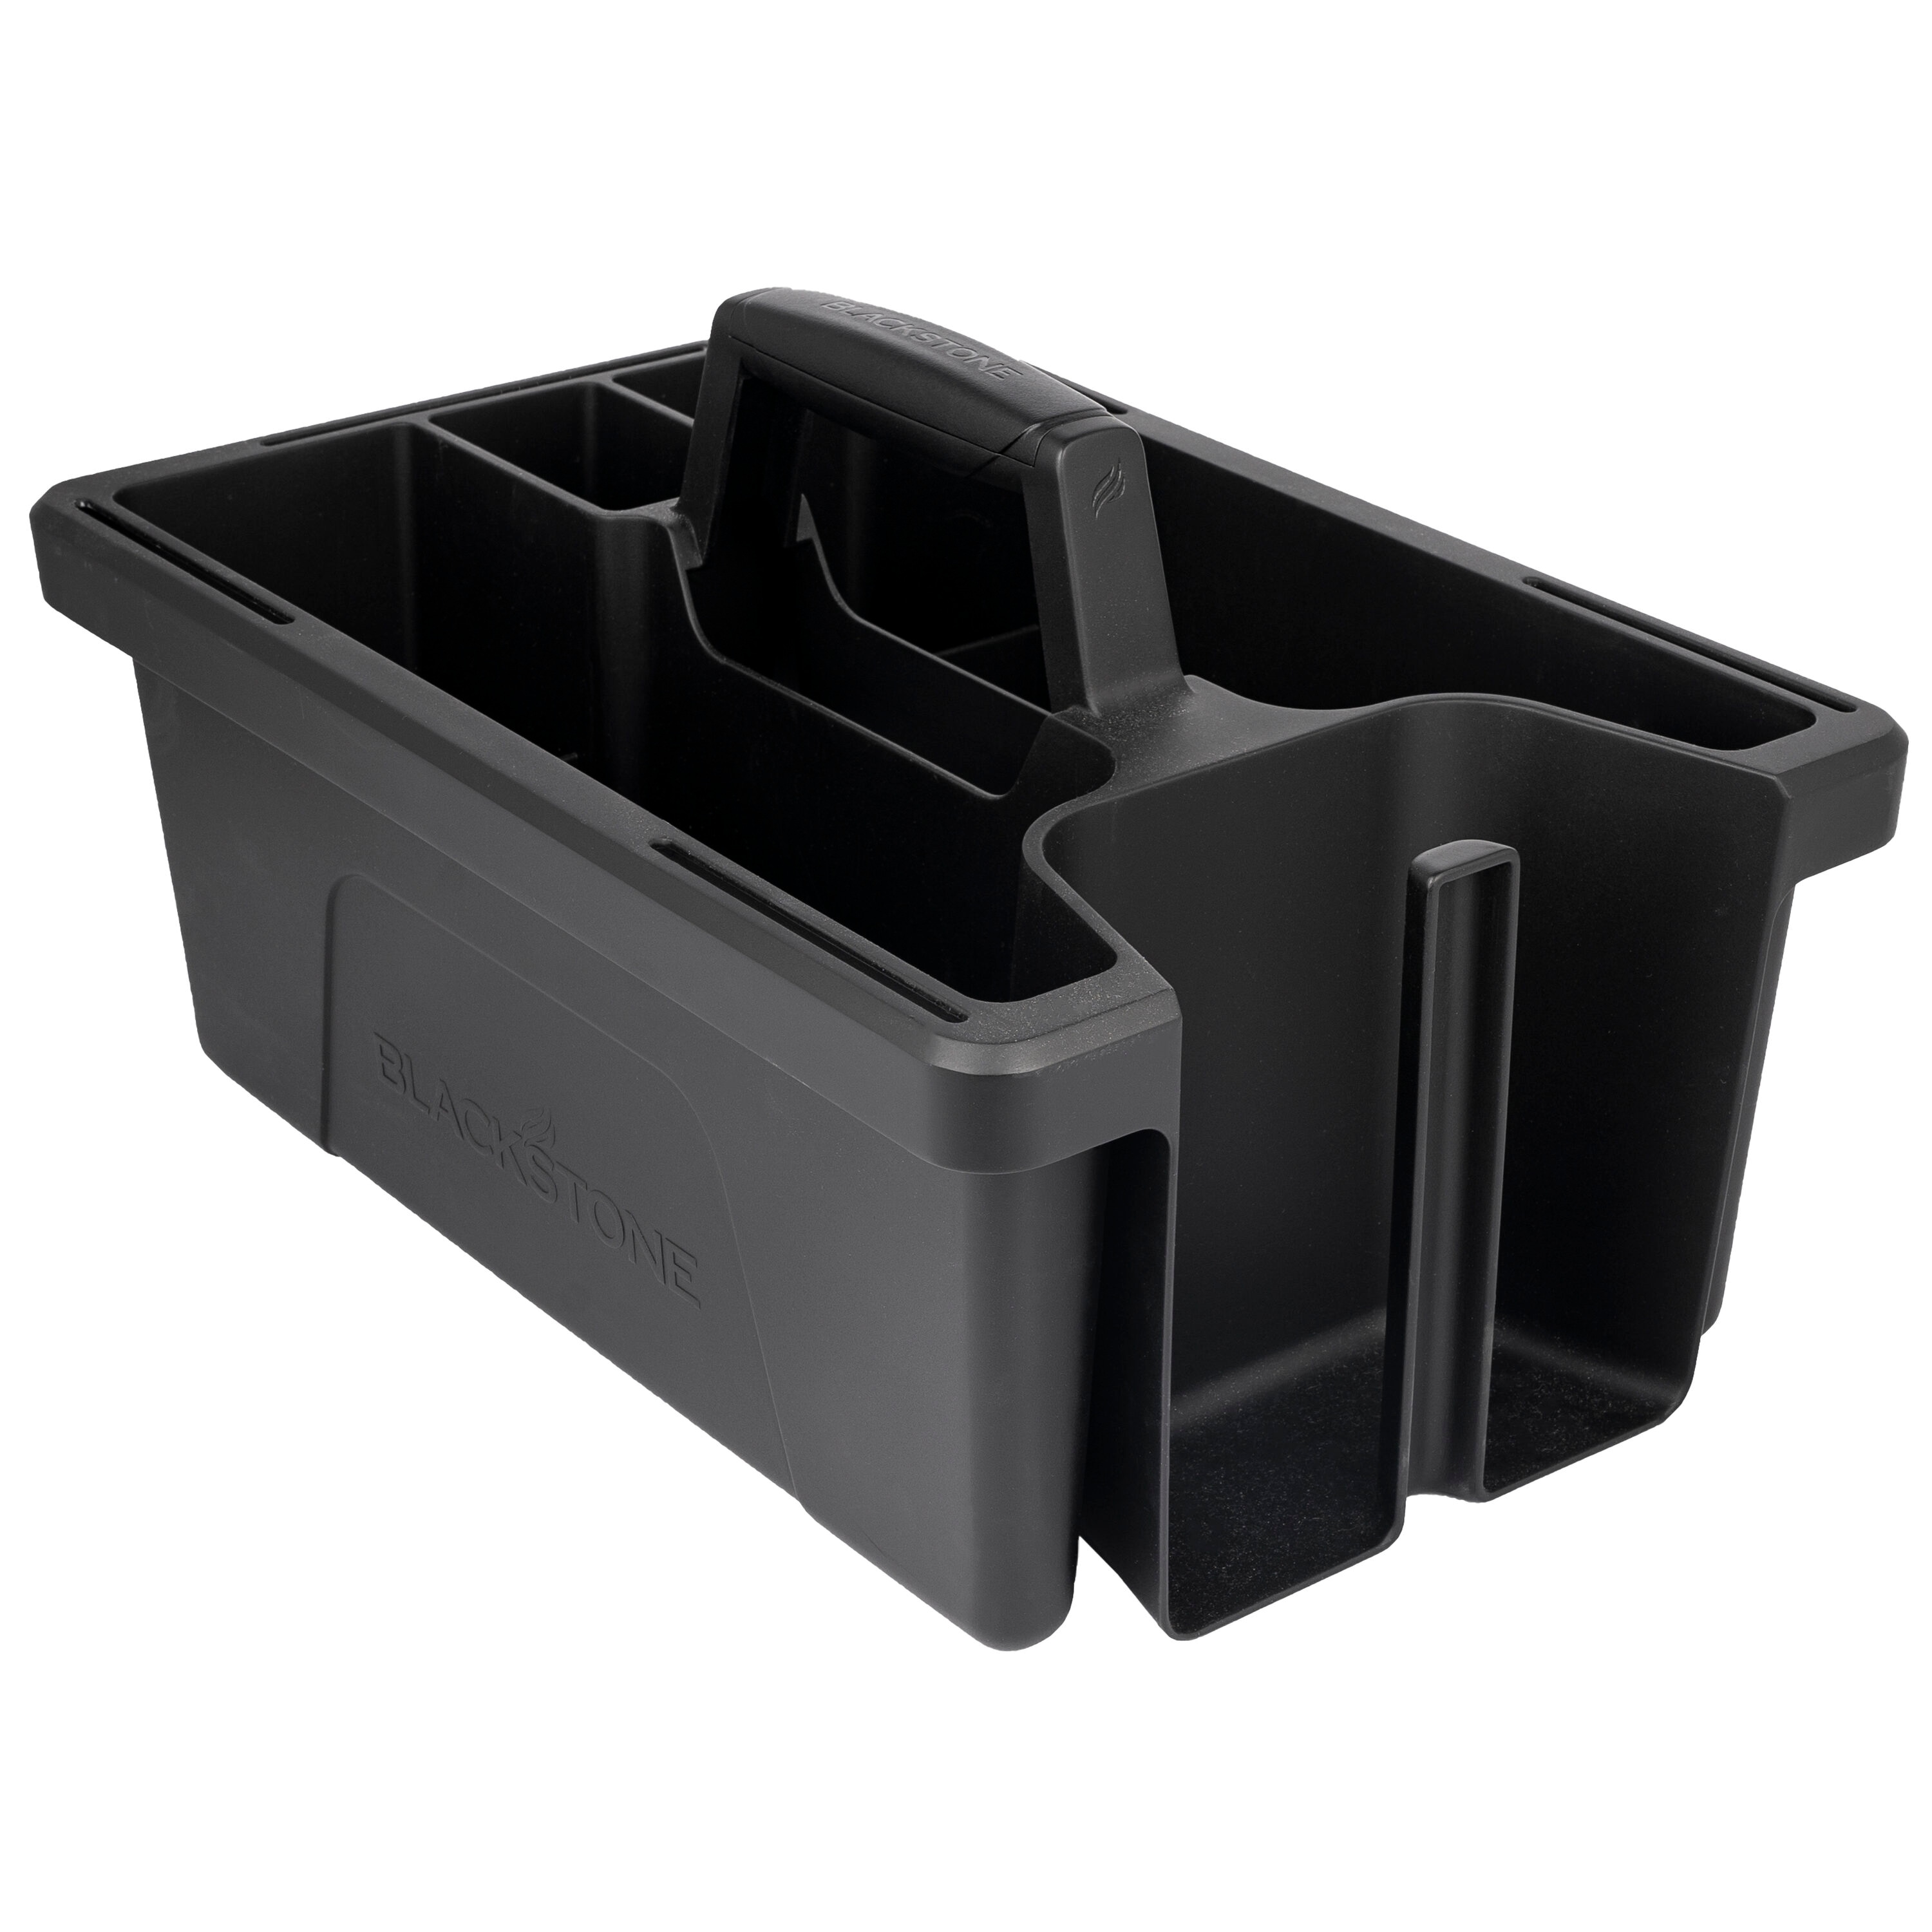 Expert Grill Bucket Caddy Organizer with Pockets for Grilling